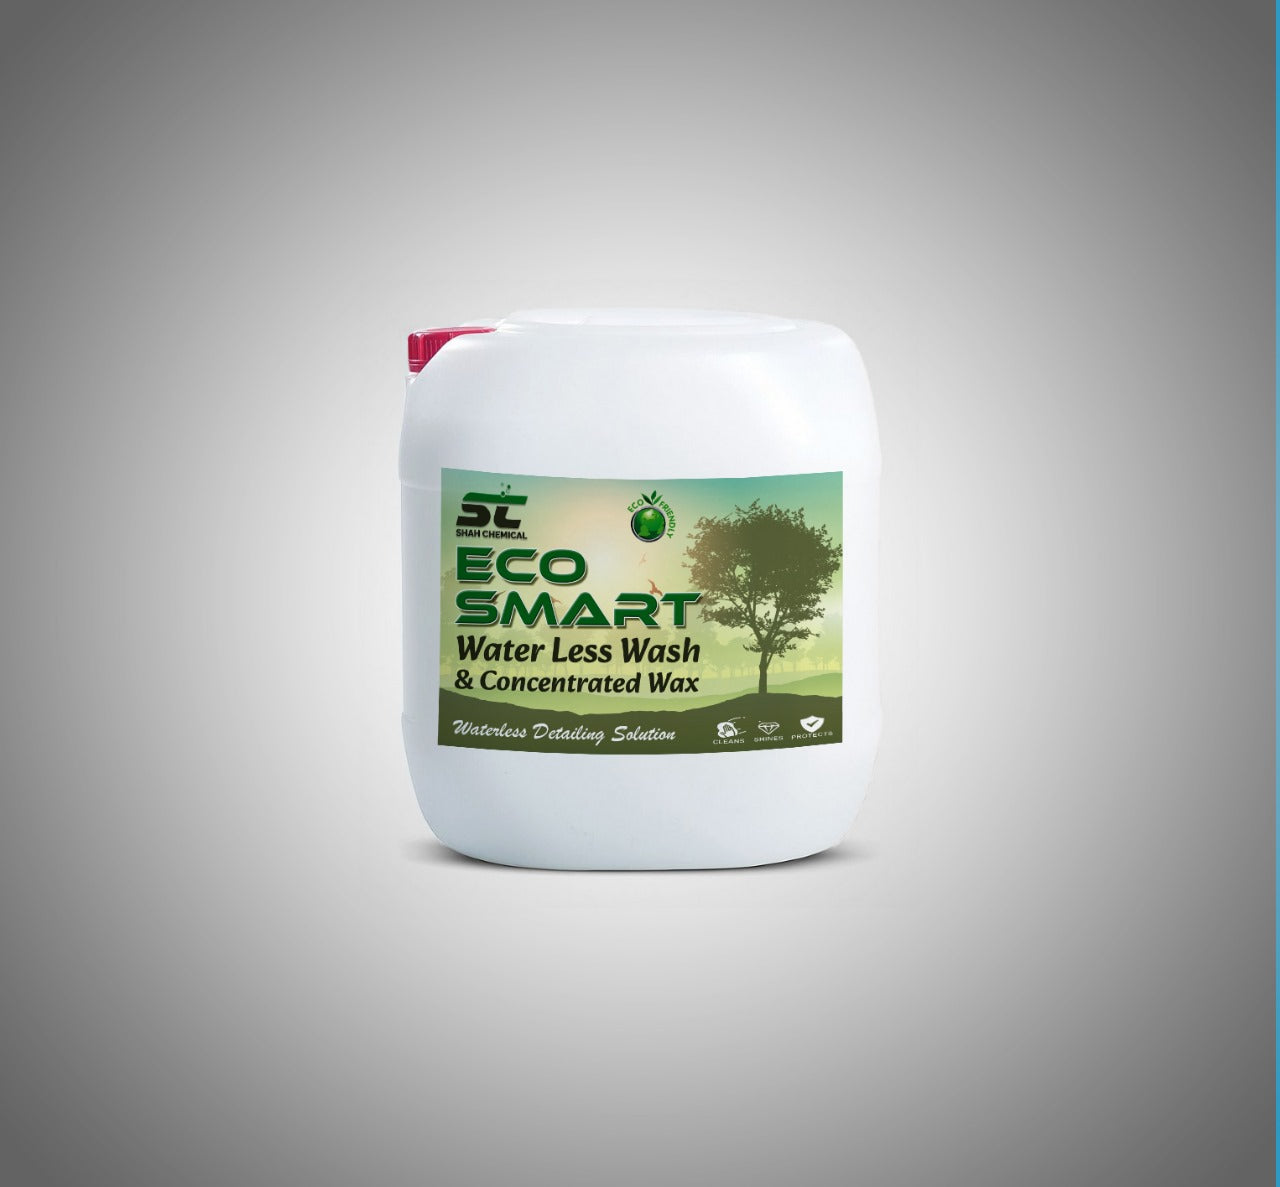 Eco Smart Water Less wash & wax - 30 litre